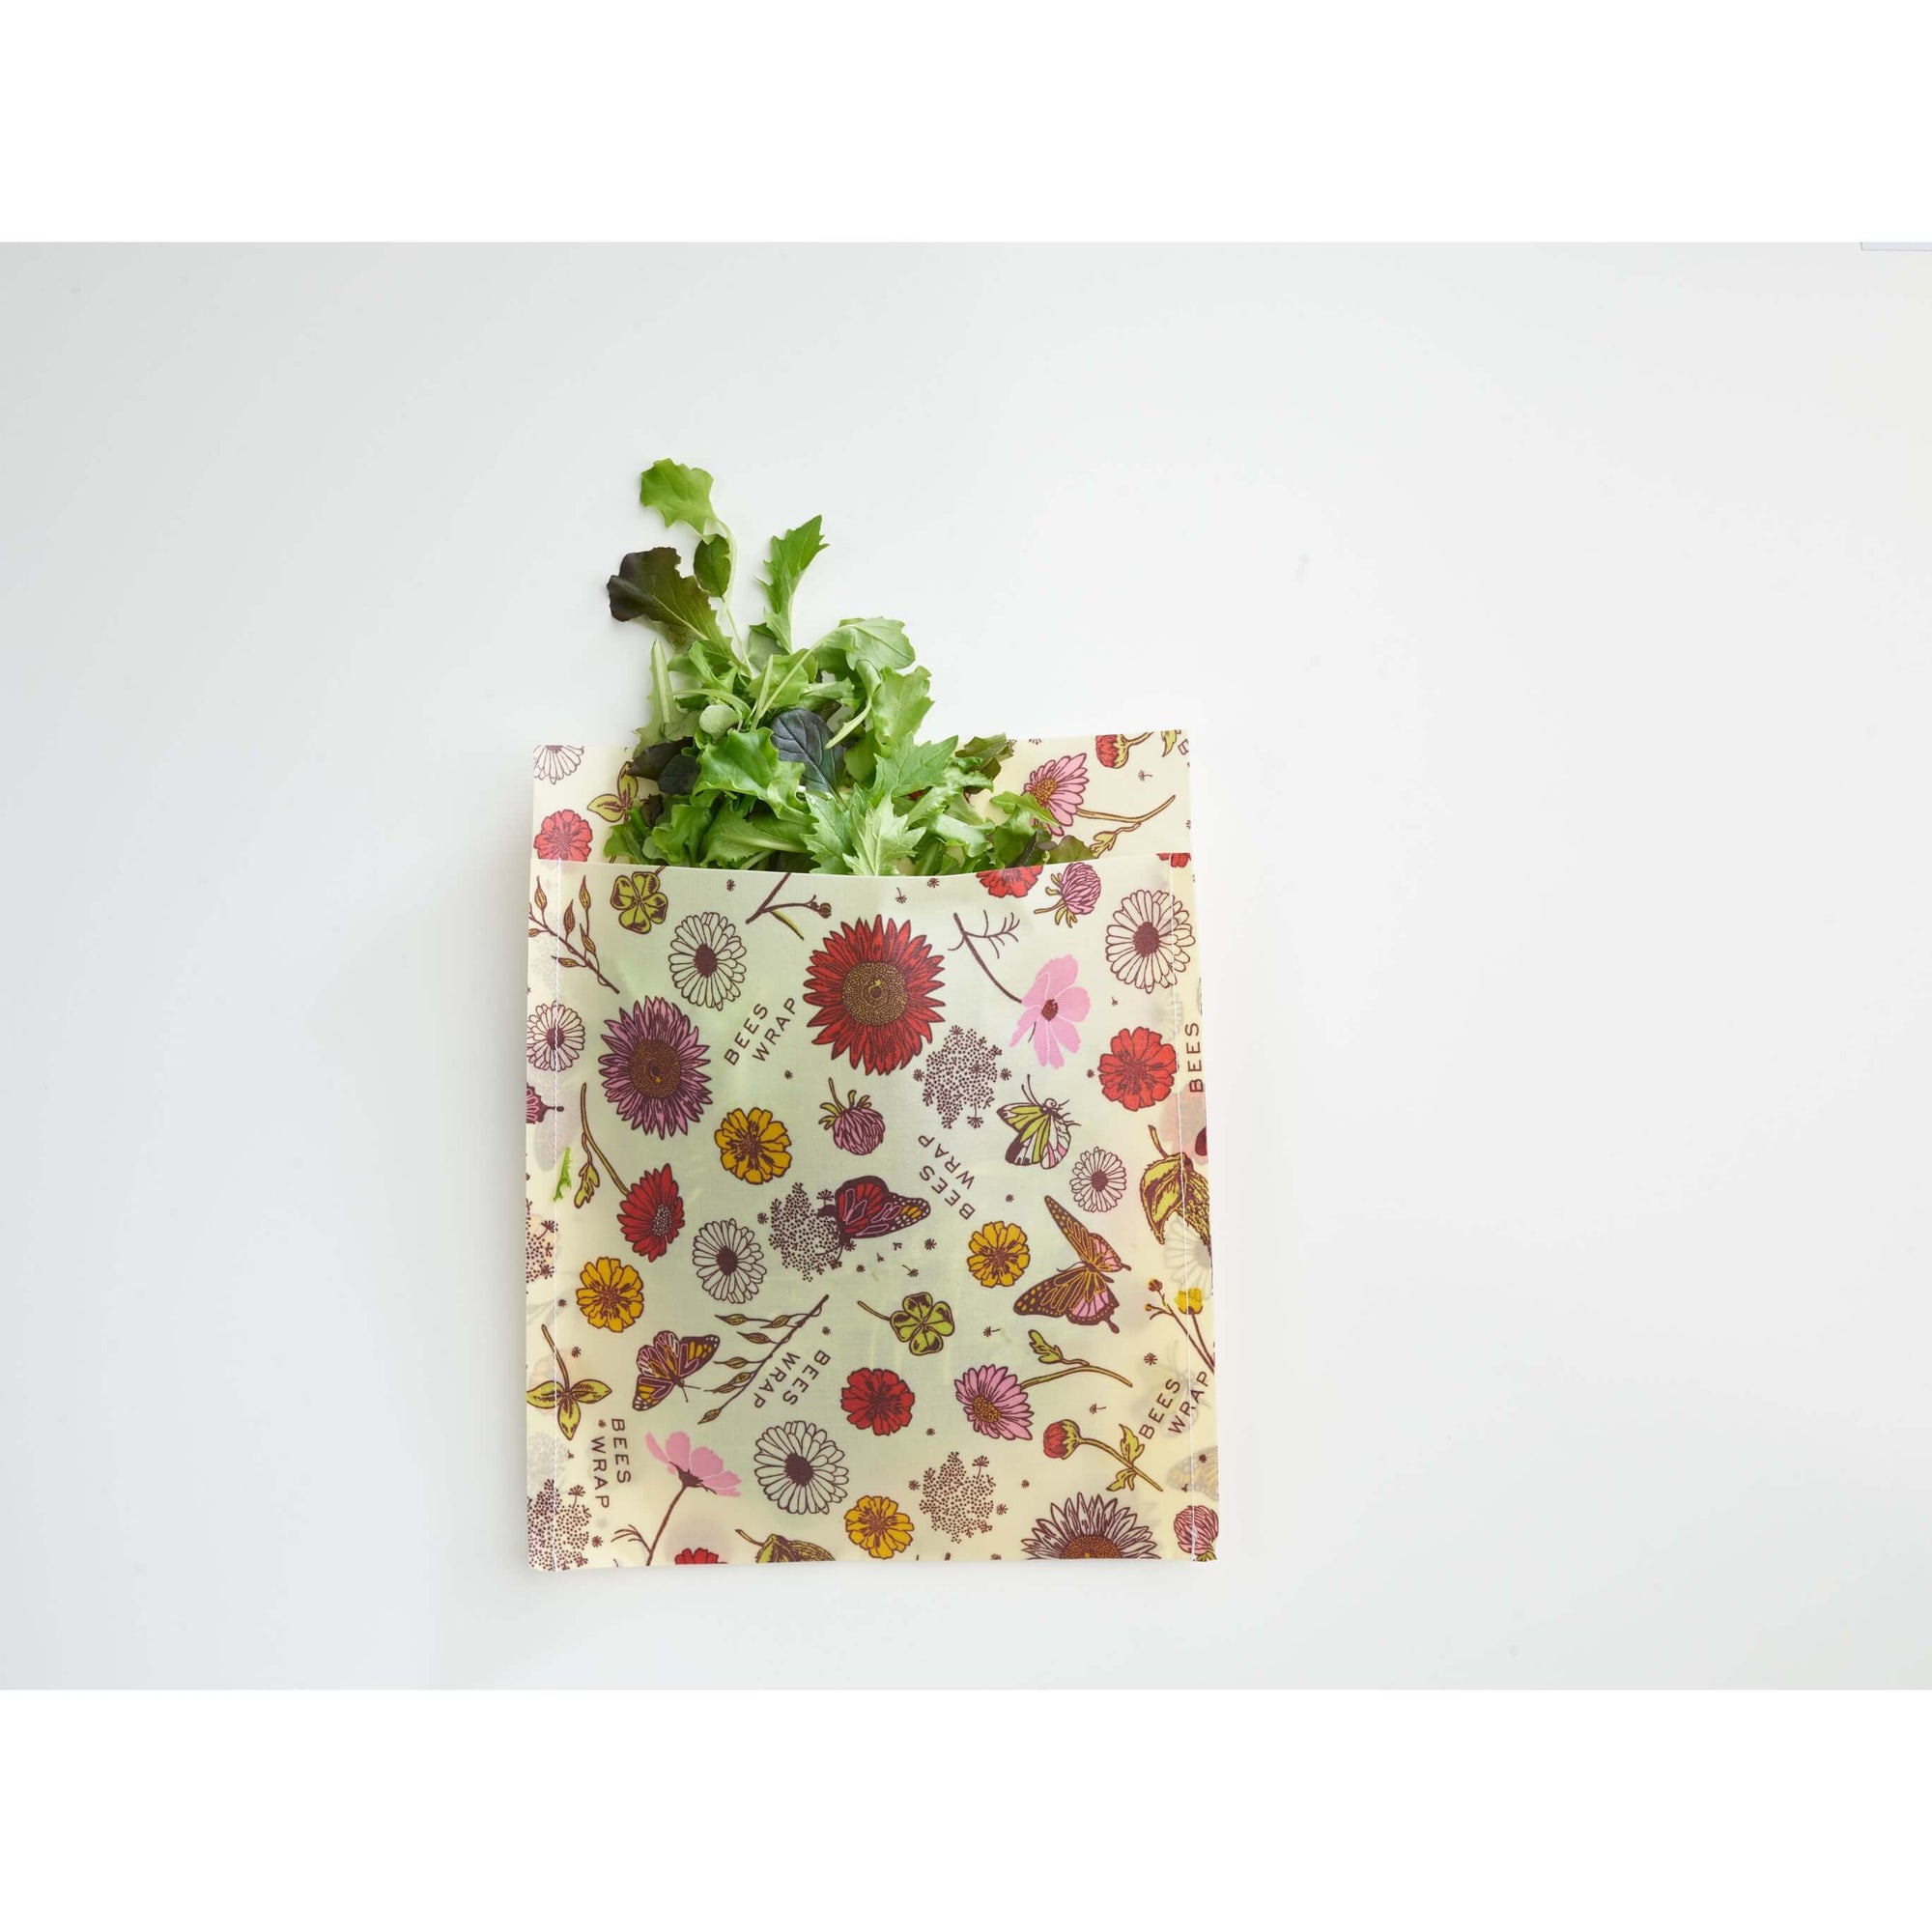 Bee's Wrap - Produce bags